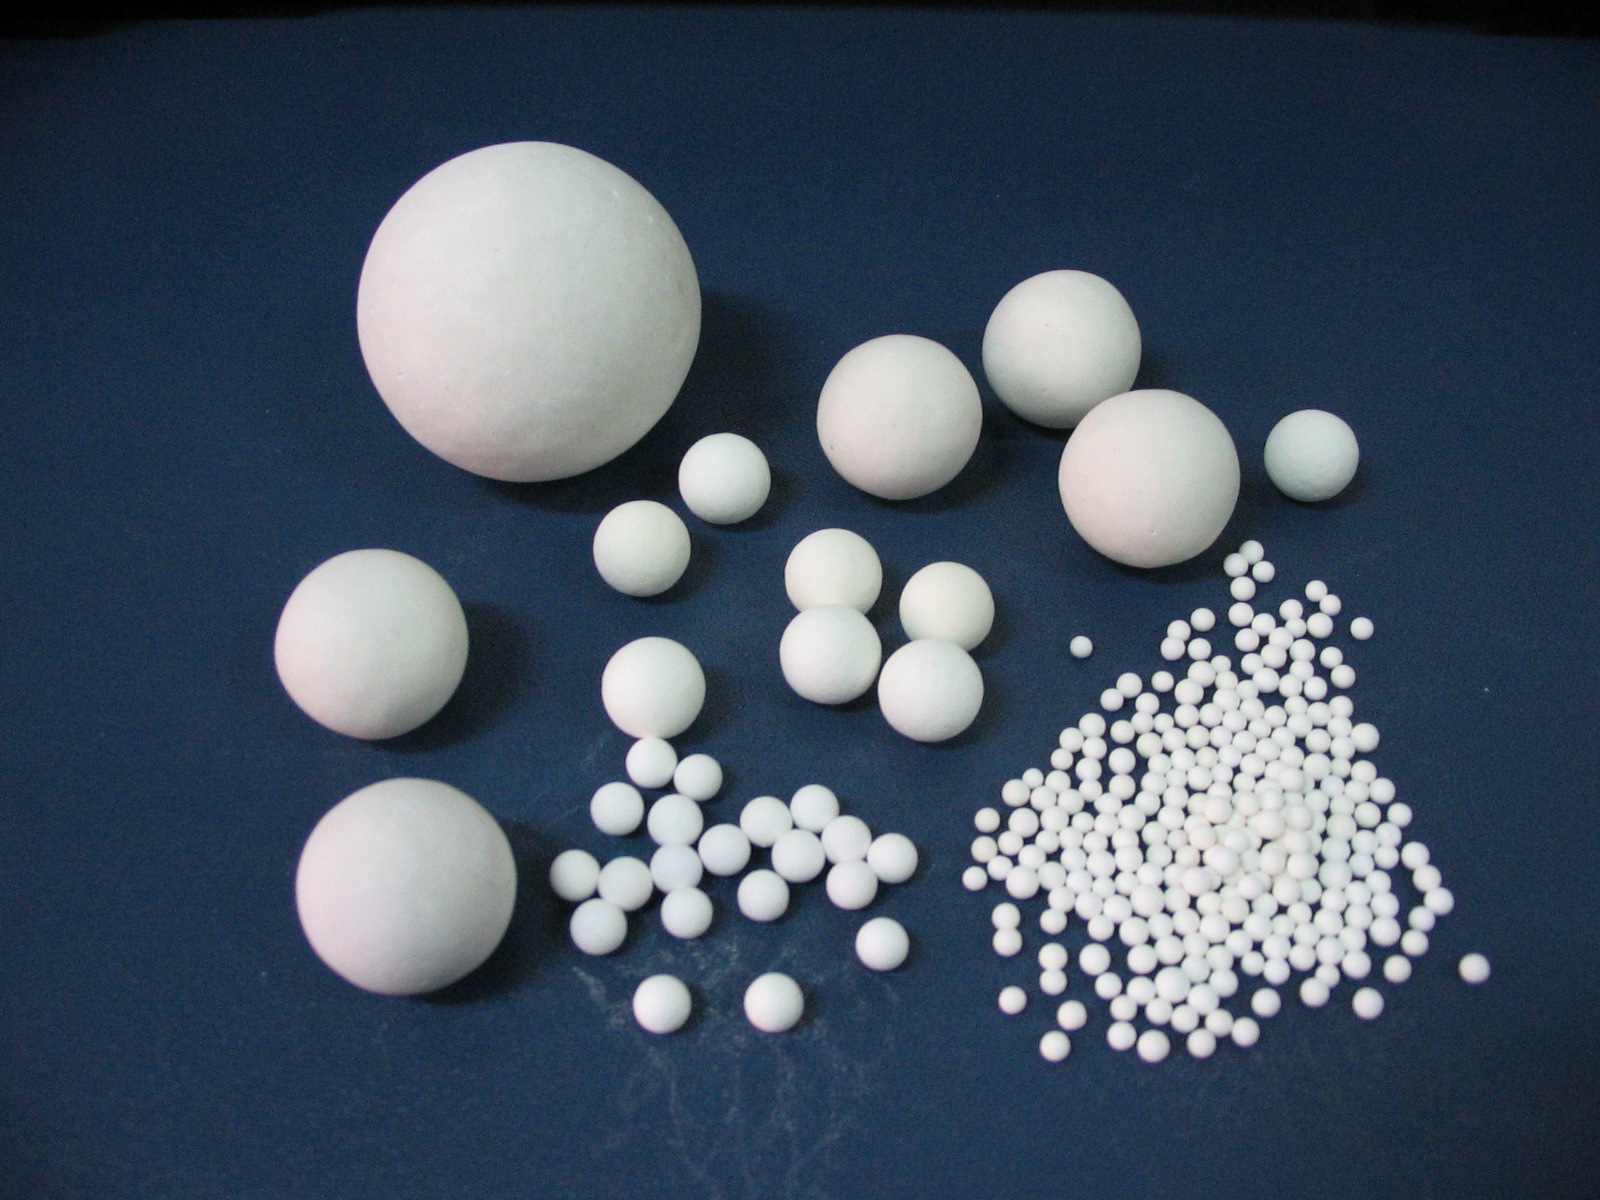  Alumina Ball For Support (Pour le support alumine Ball)